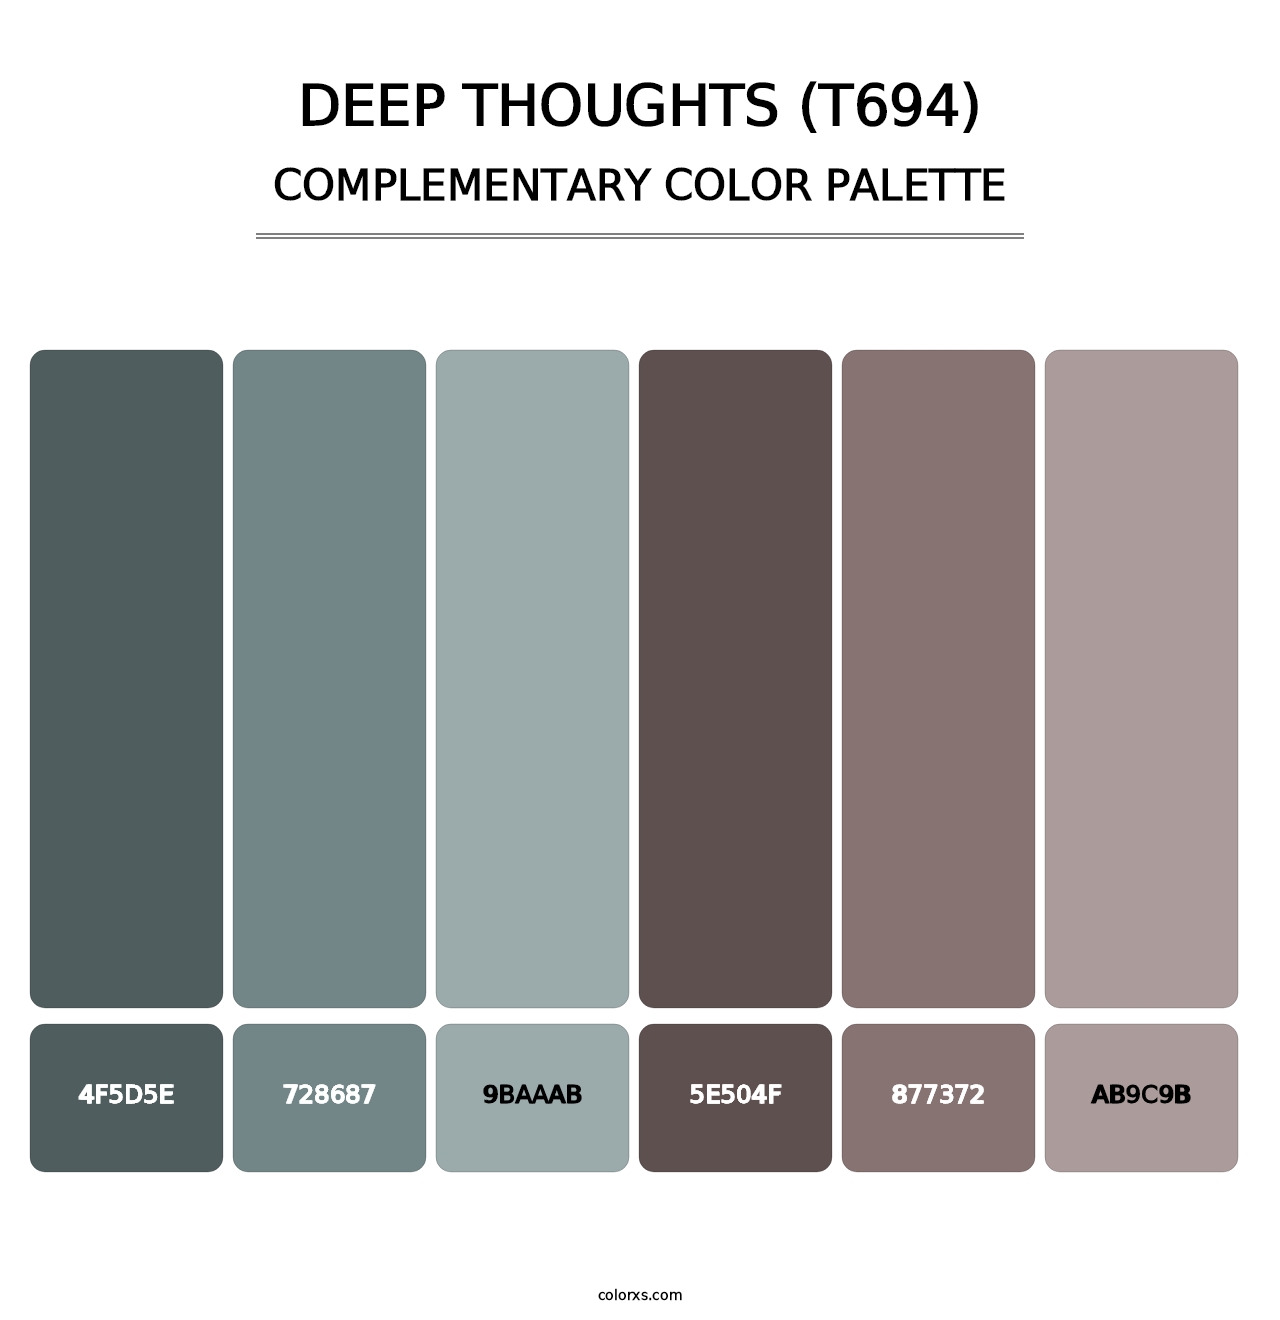 Deep Thoughts (T694) - Complementary Color Palette